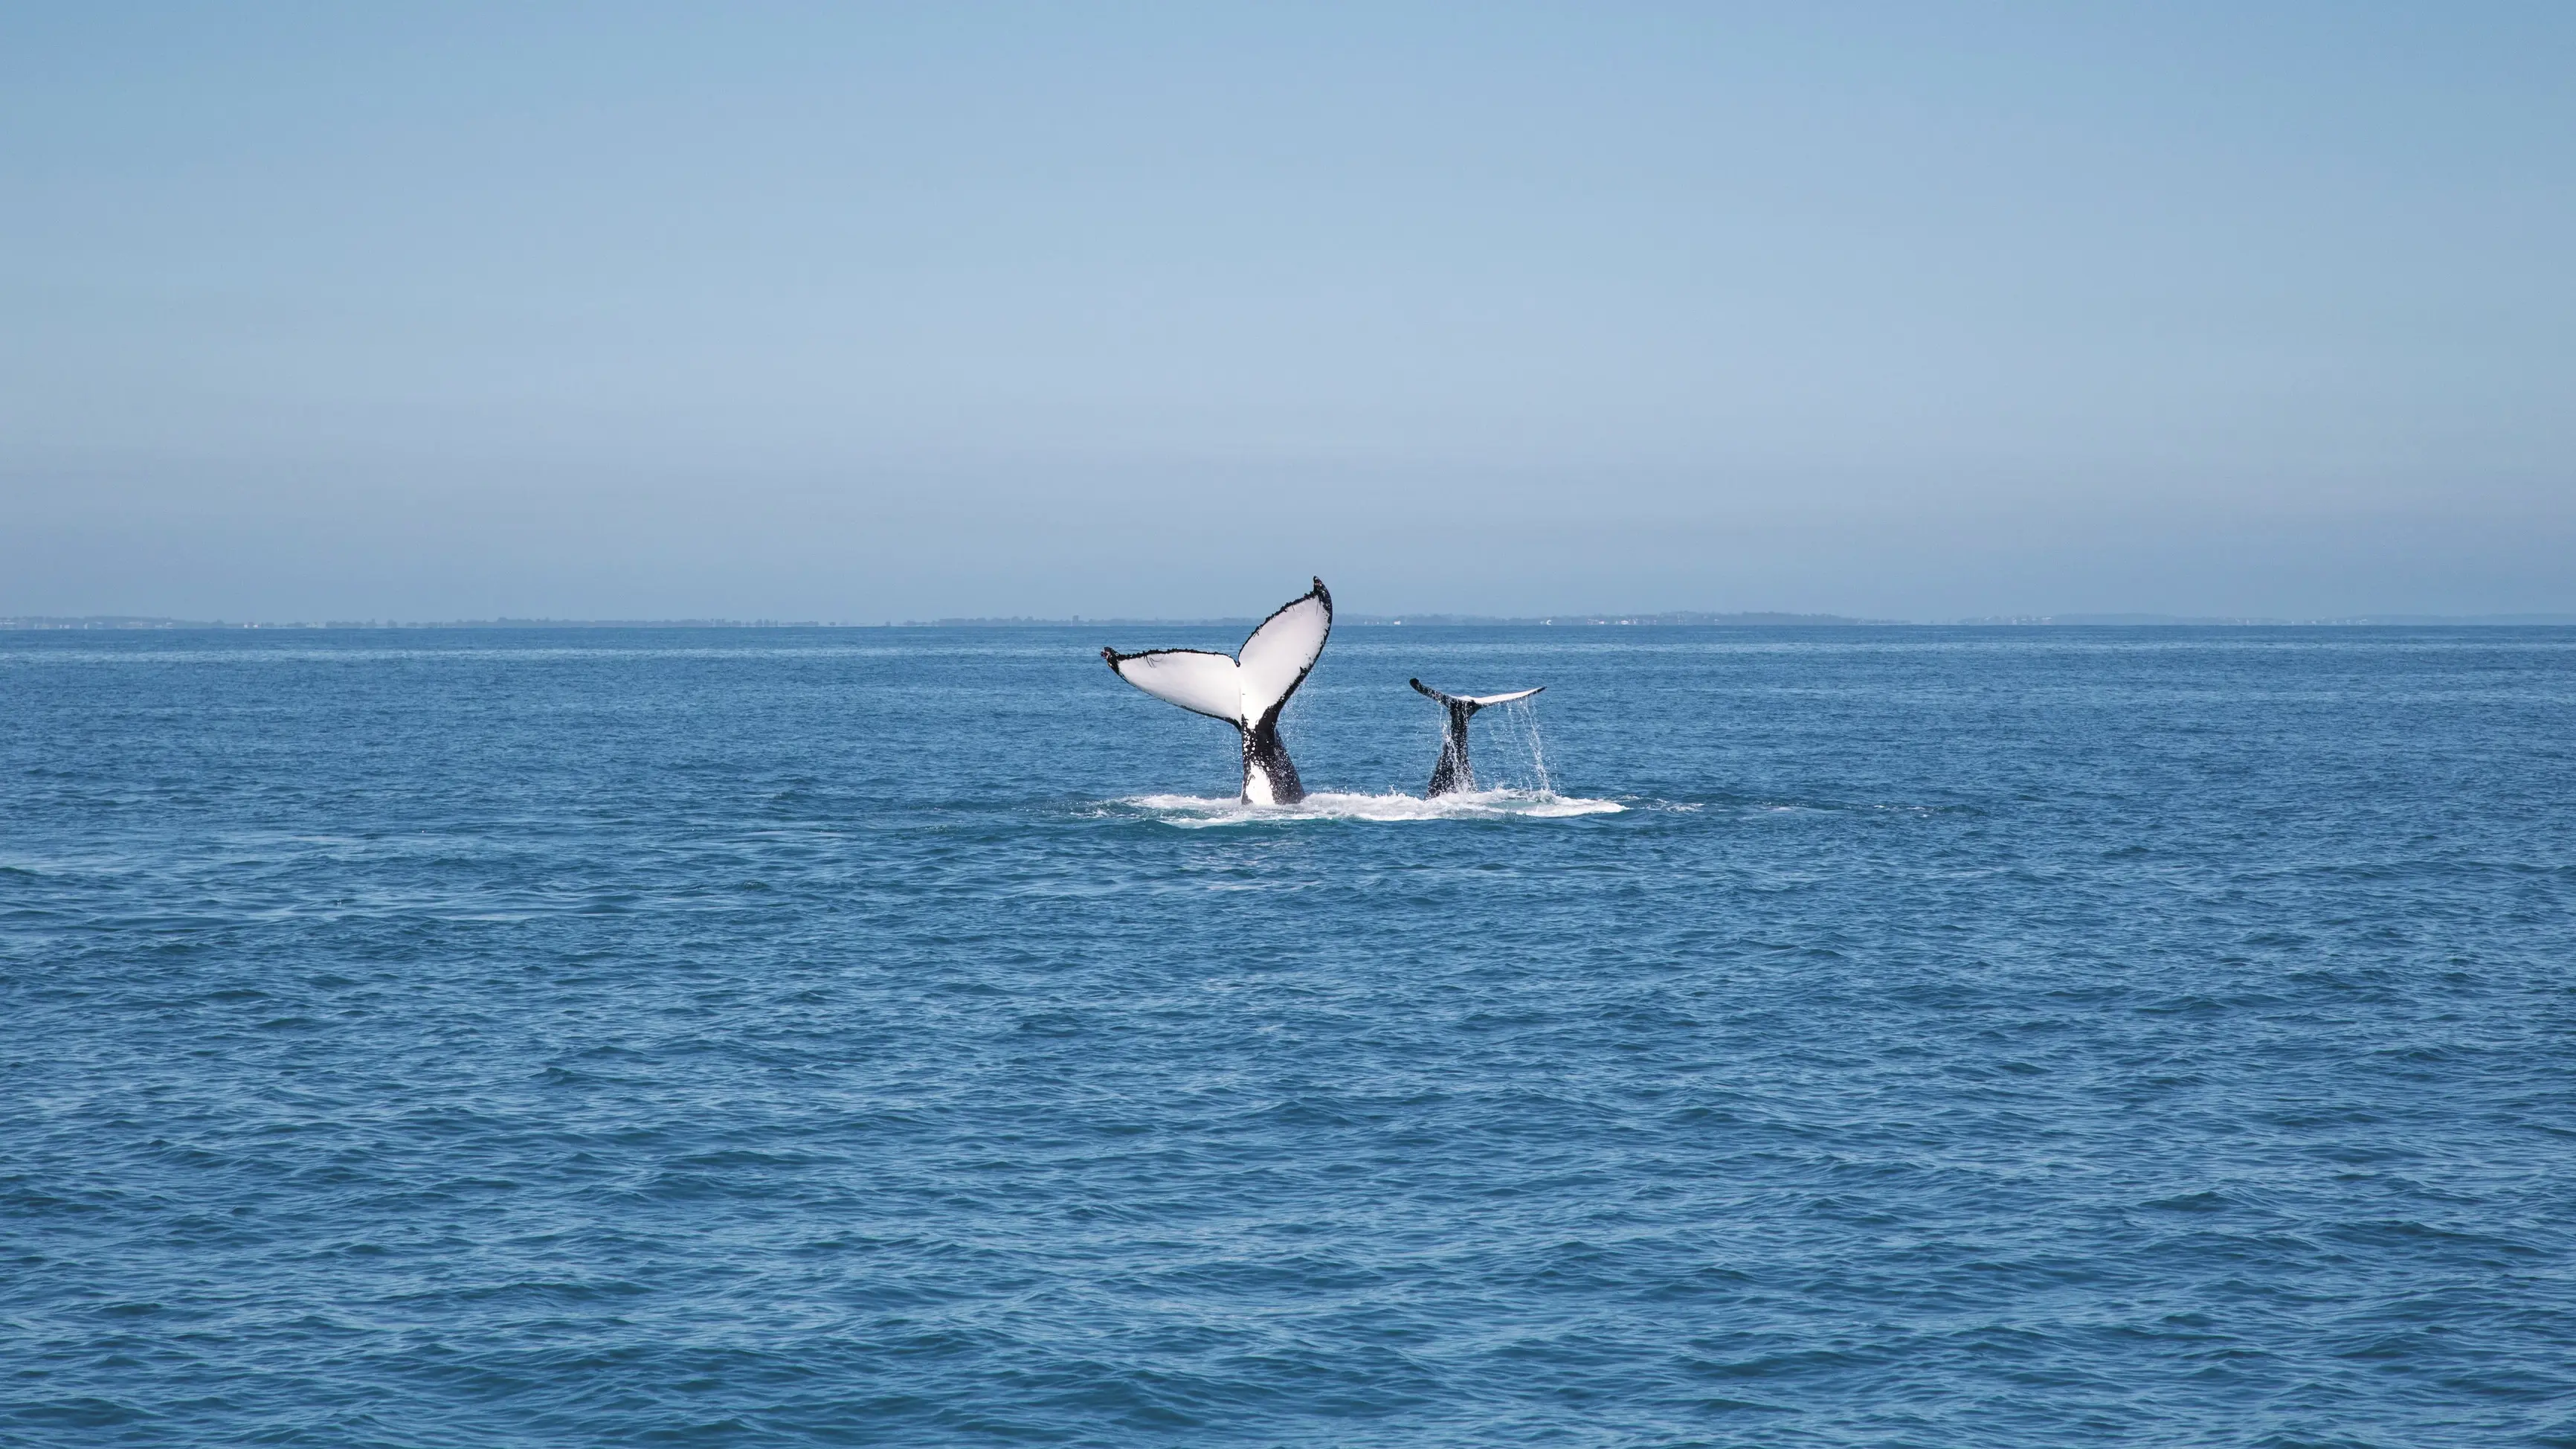 Two humpback whales' tails splashing in the water off the coast of Hervey Bay, Queensland. Image credit: Tourism and Events Queensland